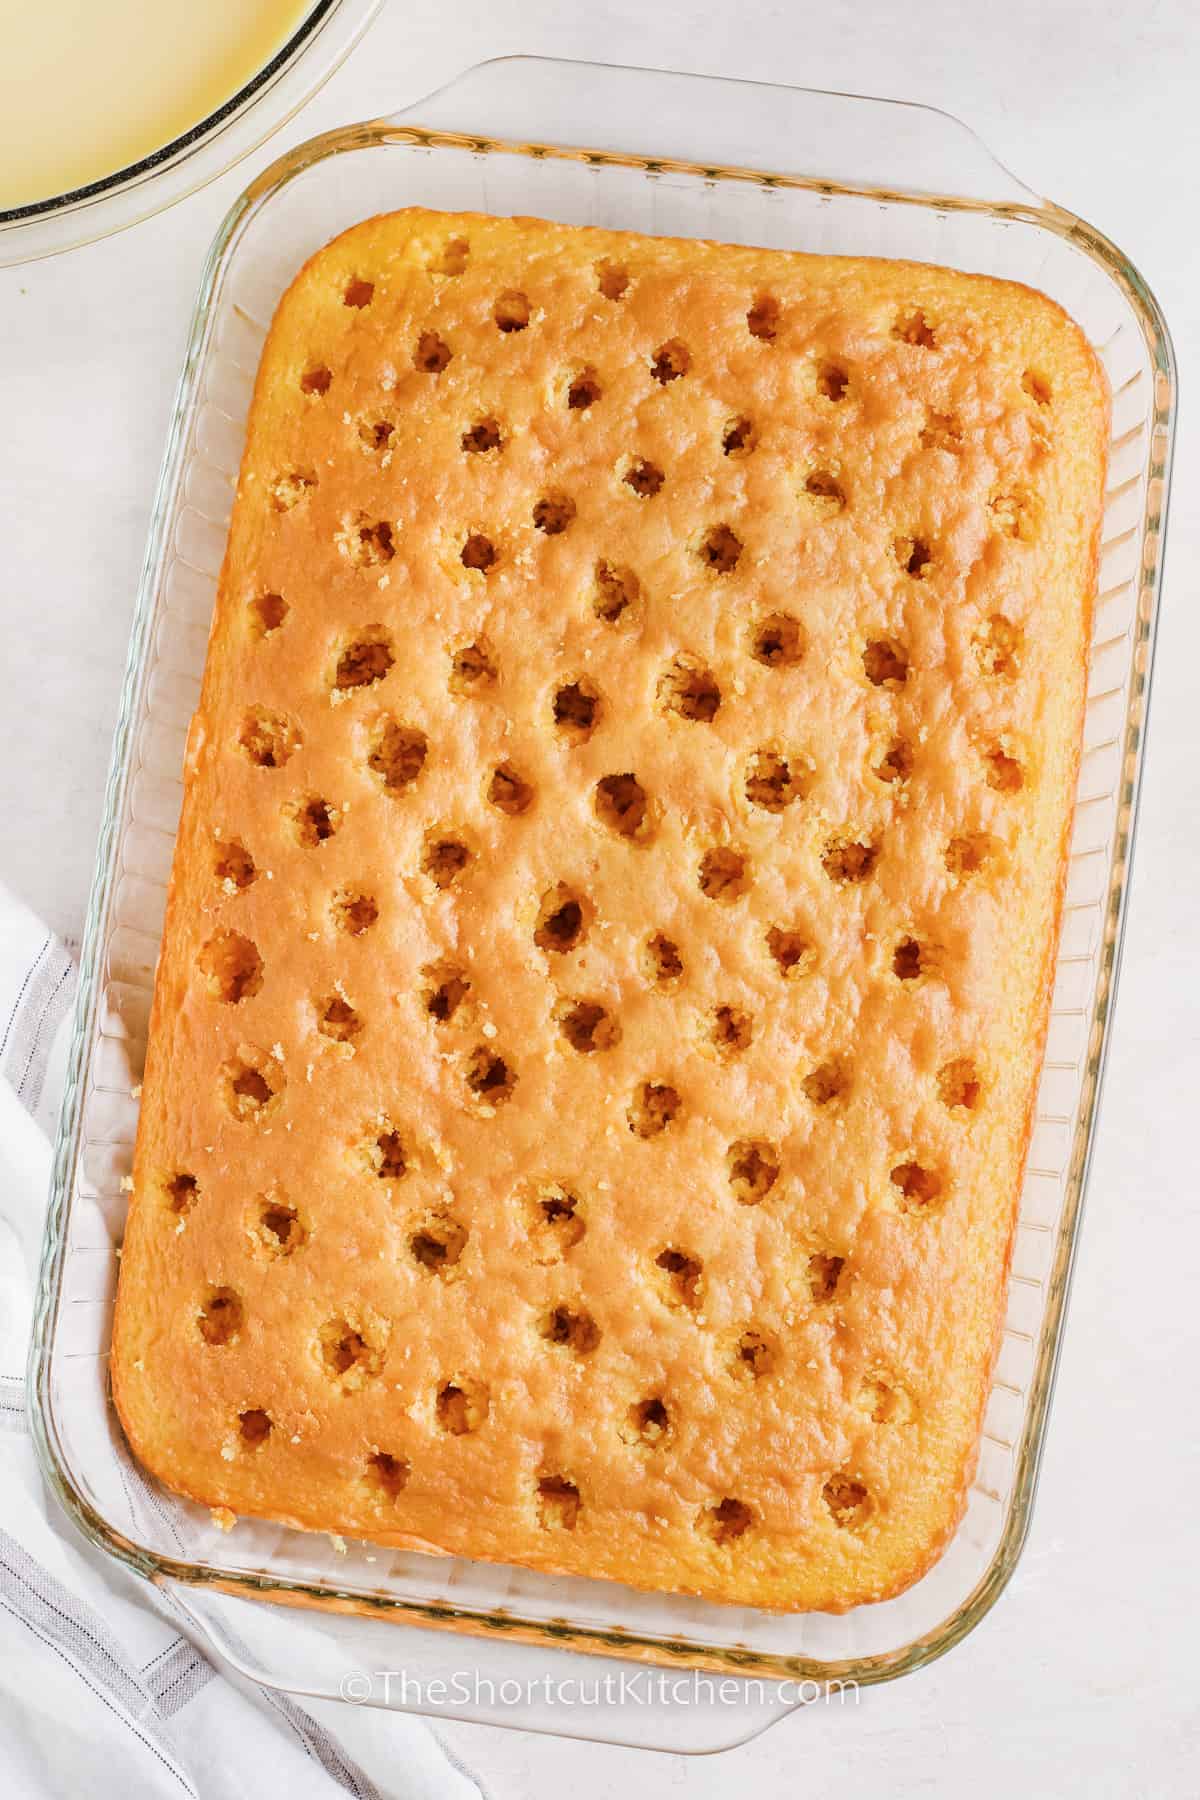 yellow cake with holes poked in it